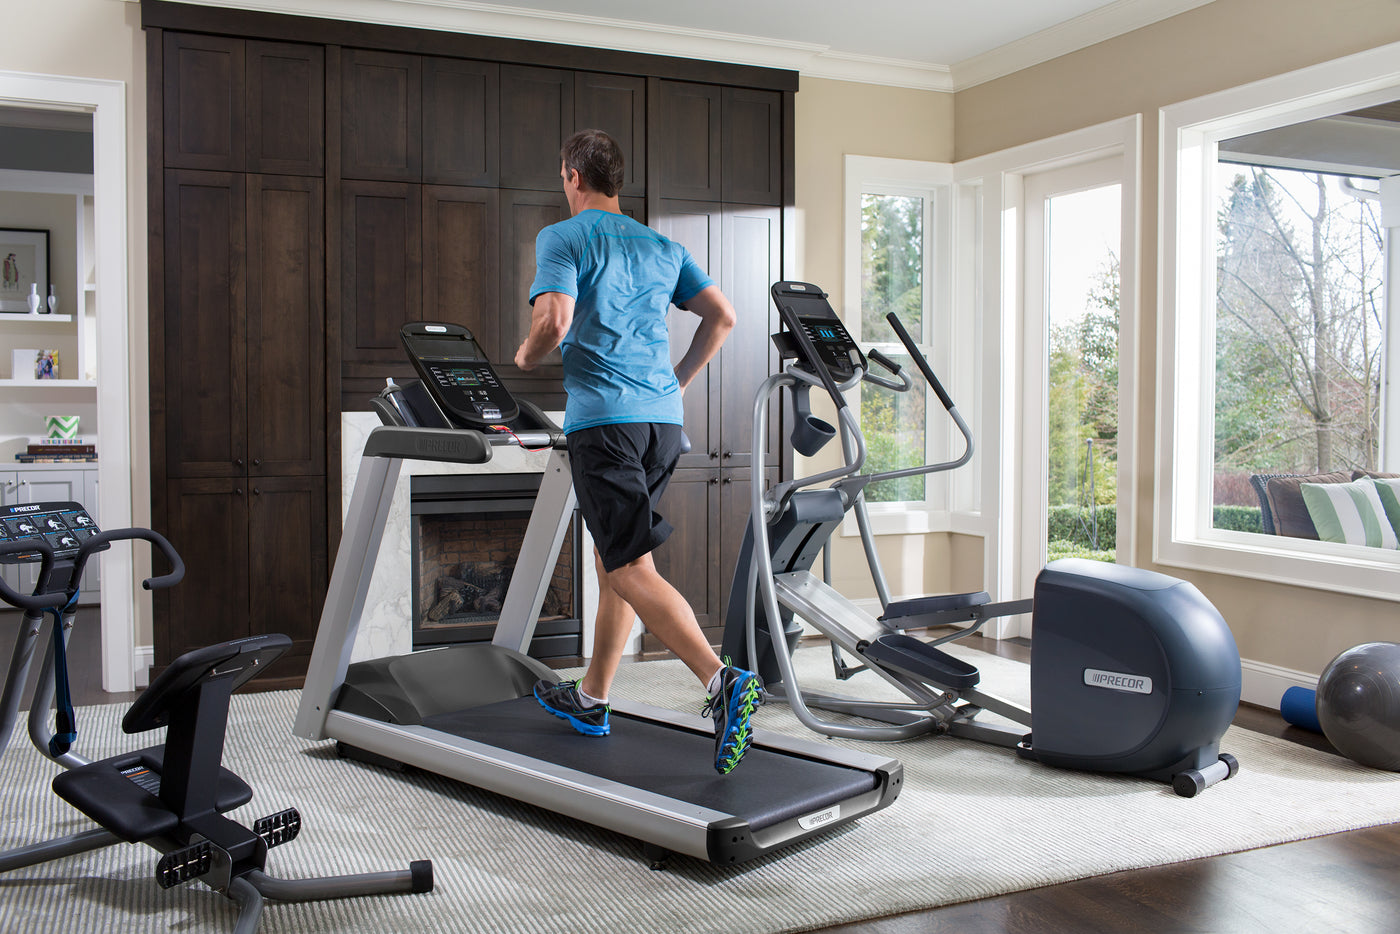 Man running on a Precor TRM 445 treadmill in his home gym that also includes a Precor EFX 447 elliptical and a 240i StretchTrainer